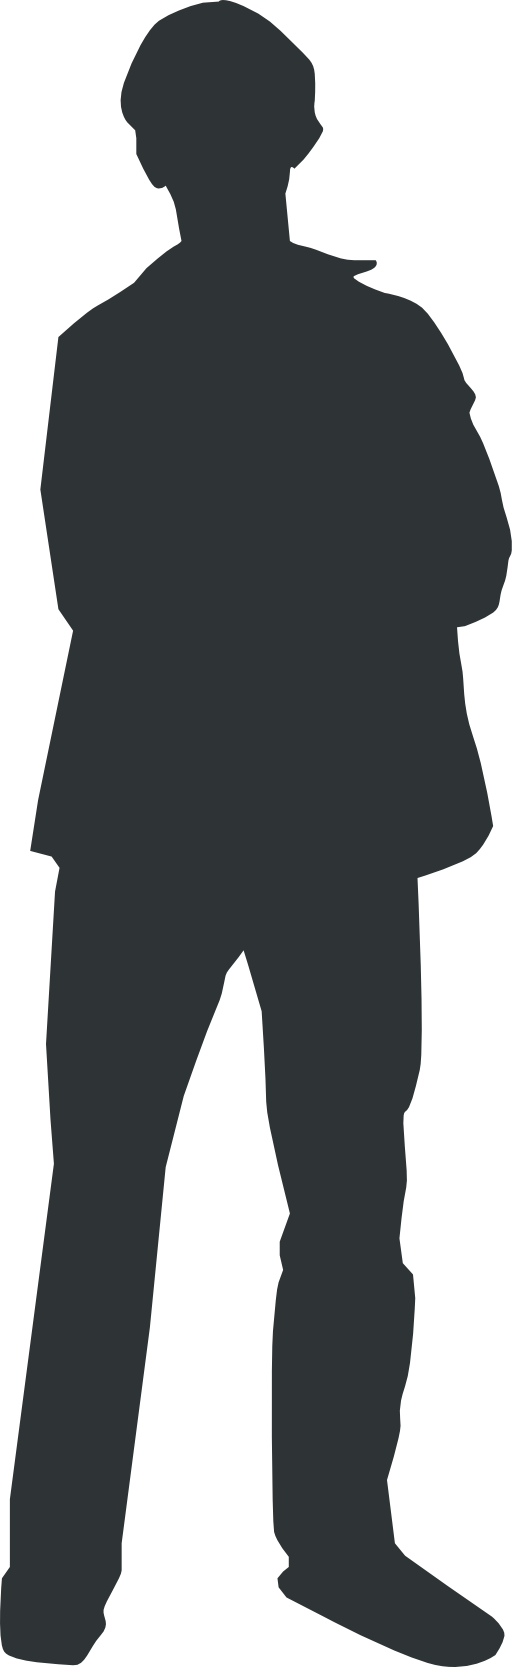 Person outline clipart.